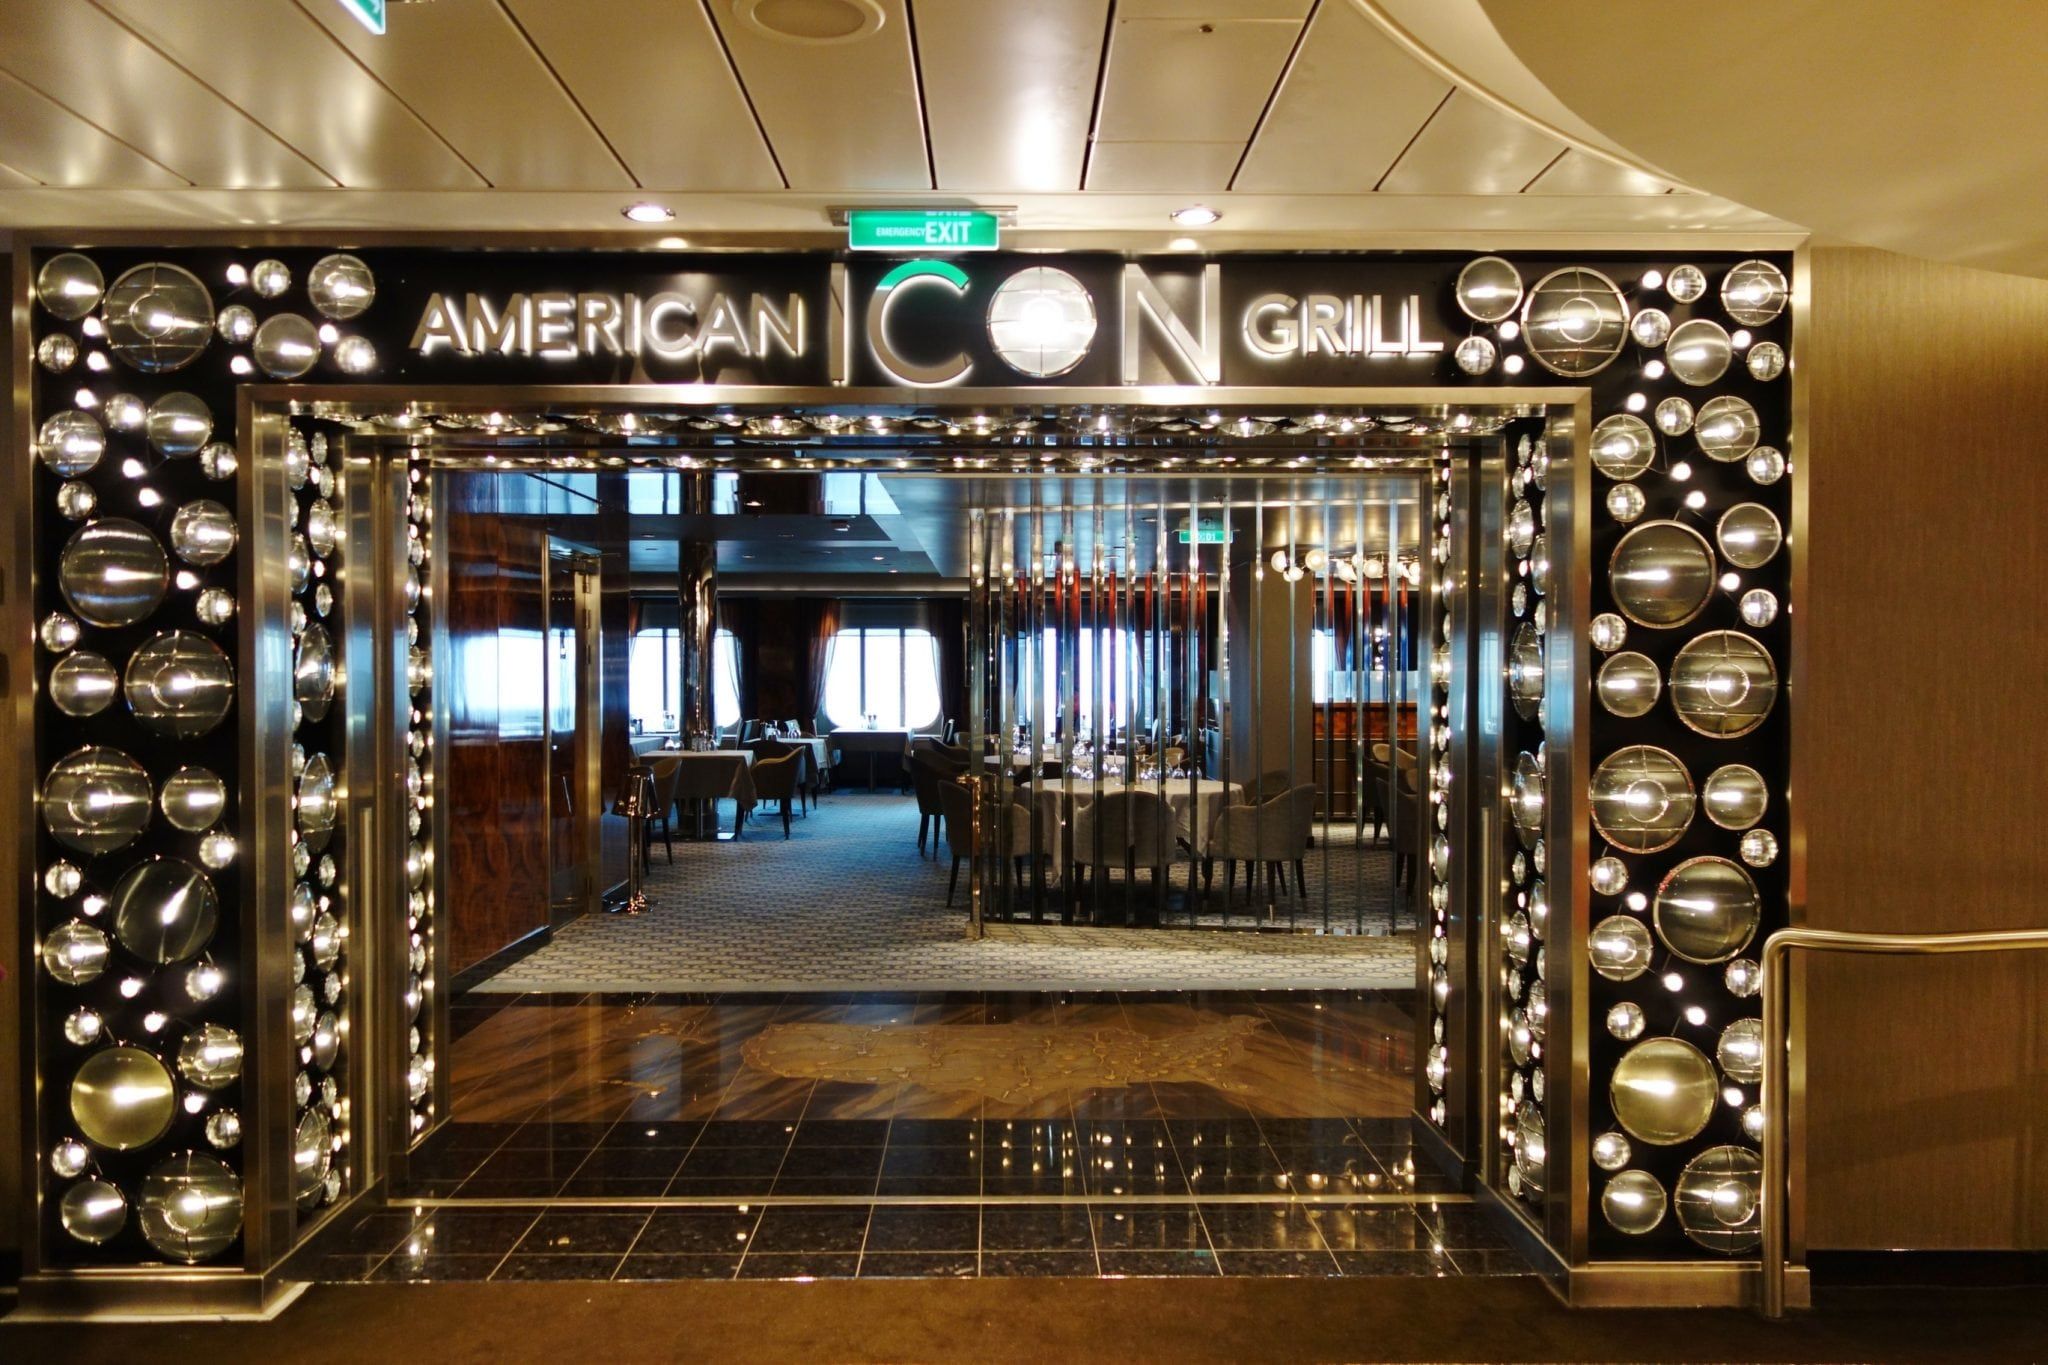 Dynamic Dining American Icon Grill